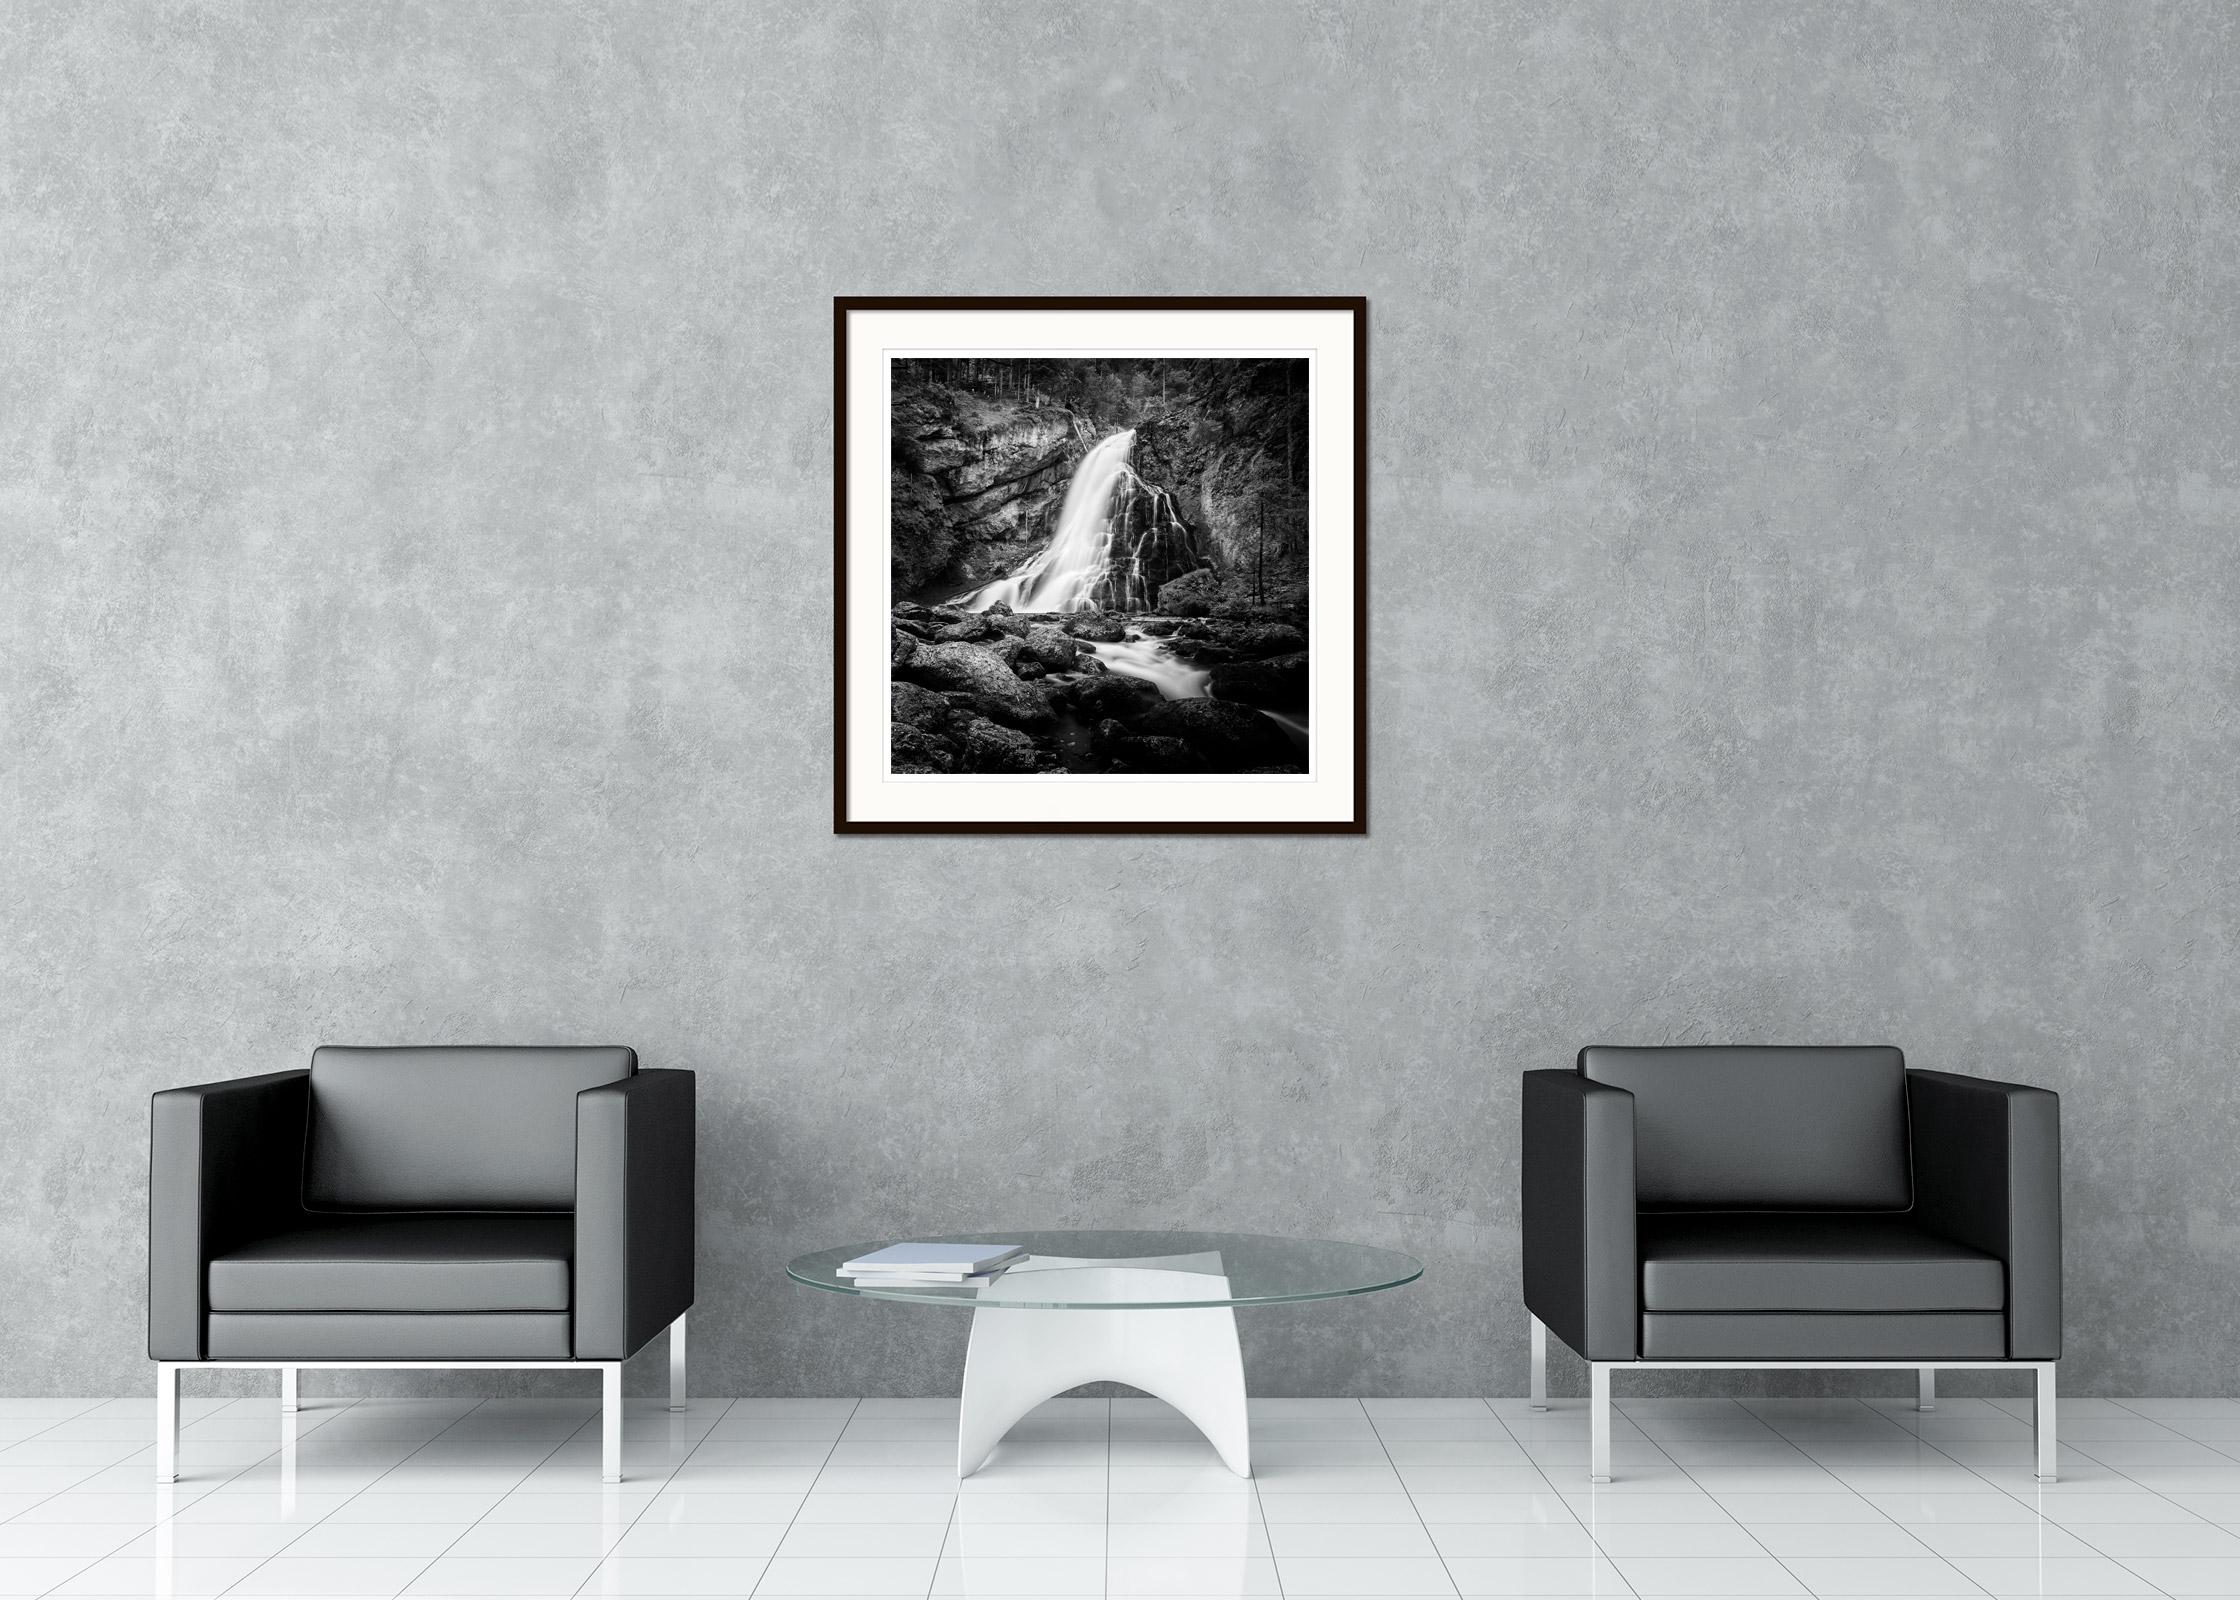 Gerald Berghammer - Limited edition of 7.
Archival fine art pigment print. Signed, titled, dated and numbered by artist. Certificate of authenticity included. Printed with 4cm white border.
15.75 x 15.75 in. (40 x 40 cm) edition of 7
23.63 x 23.63